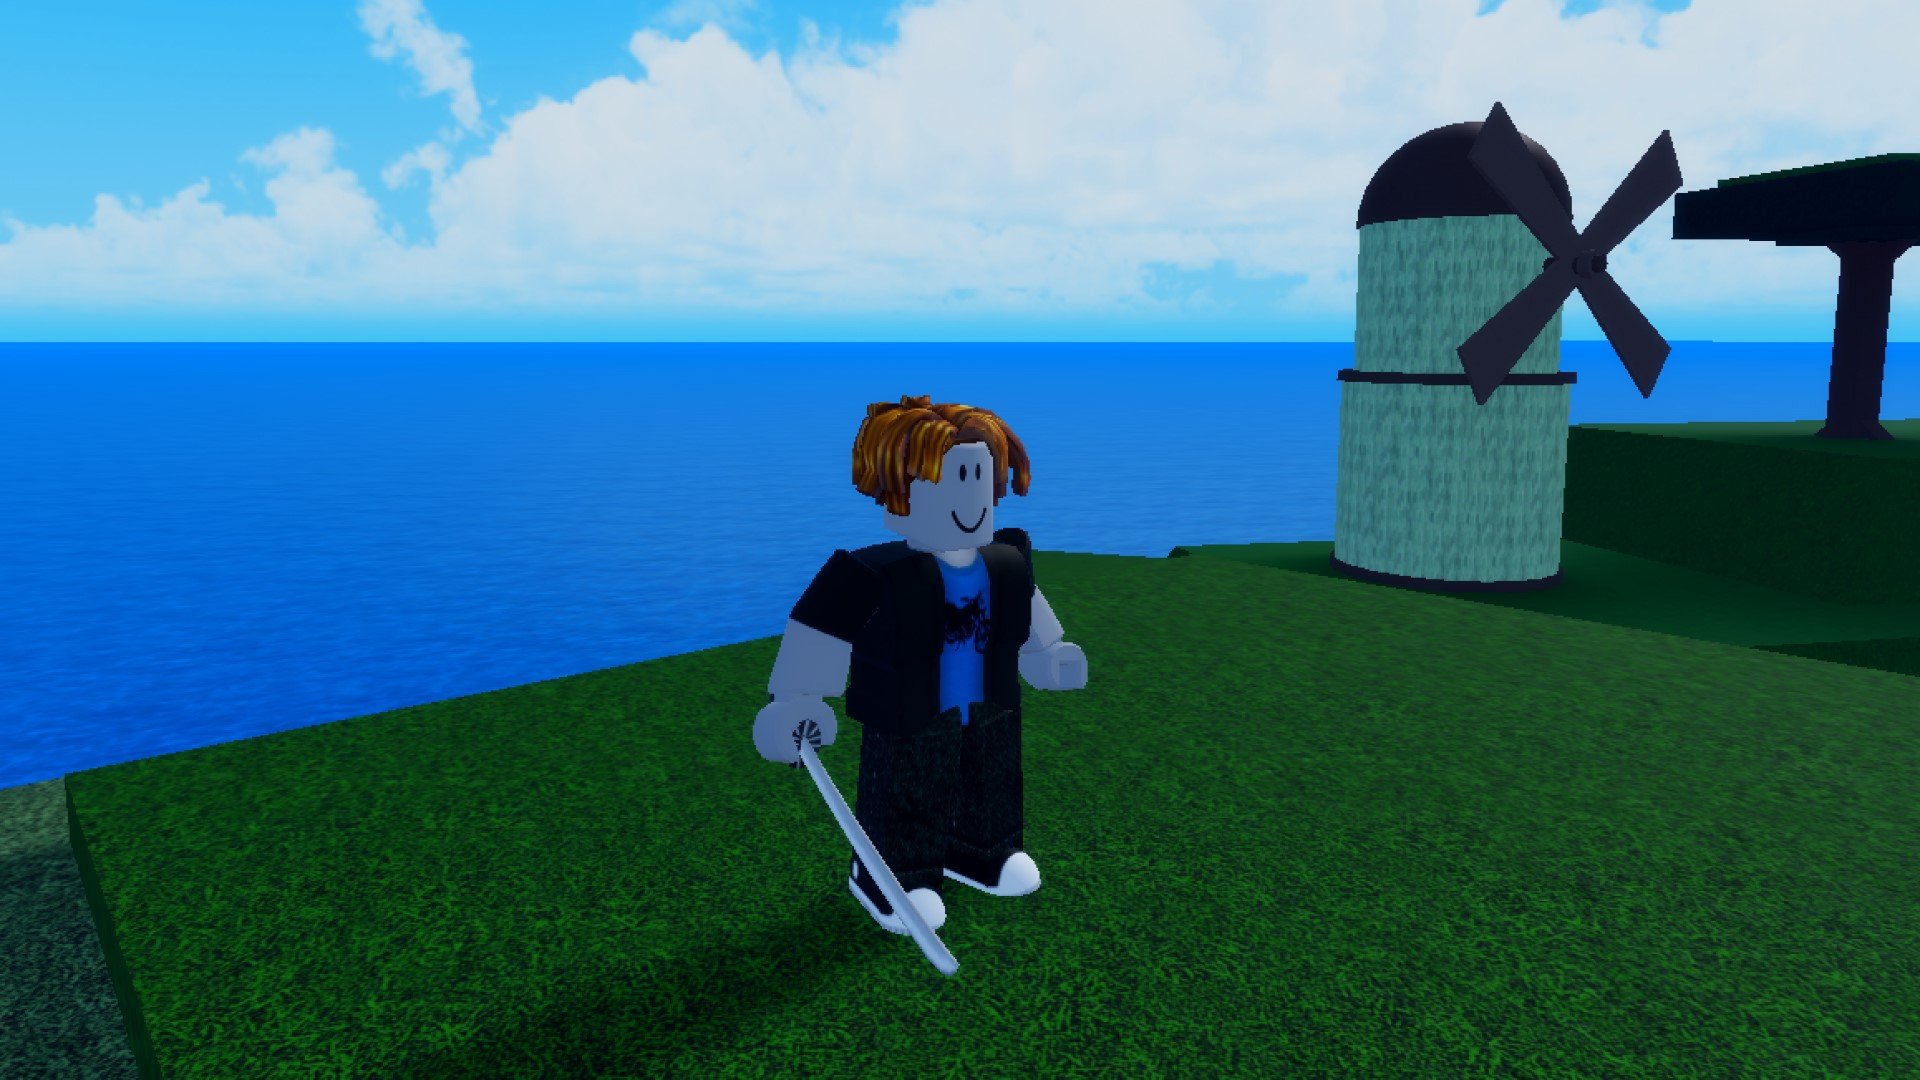 A character from Roblox game Second Piece standing on top of a tree. In the background, the sea and some clouds. A windmill is also visible on the right.